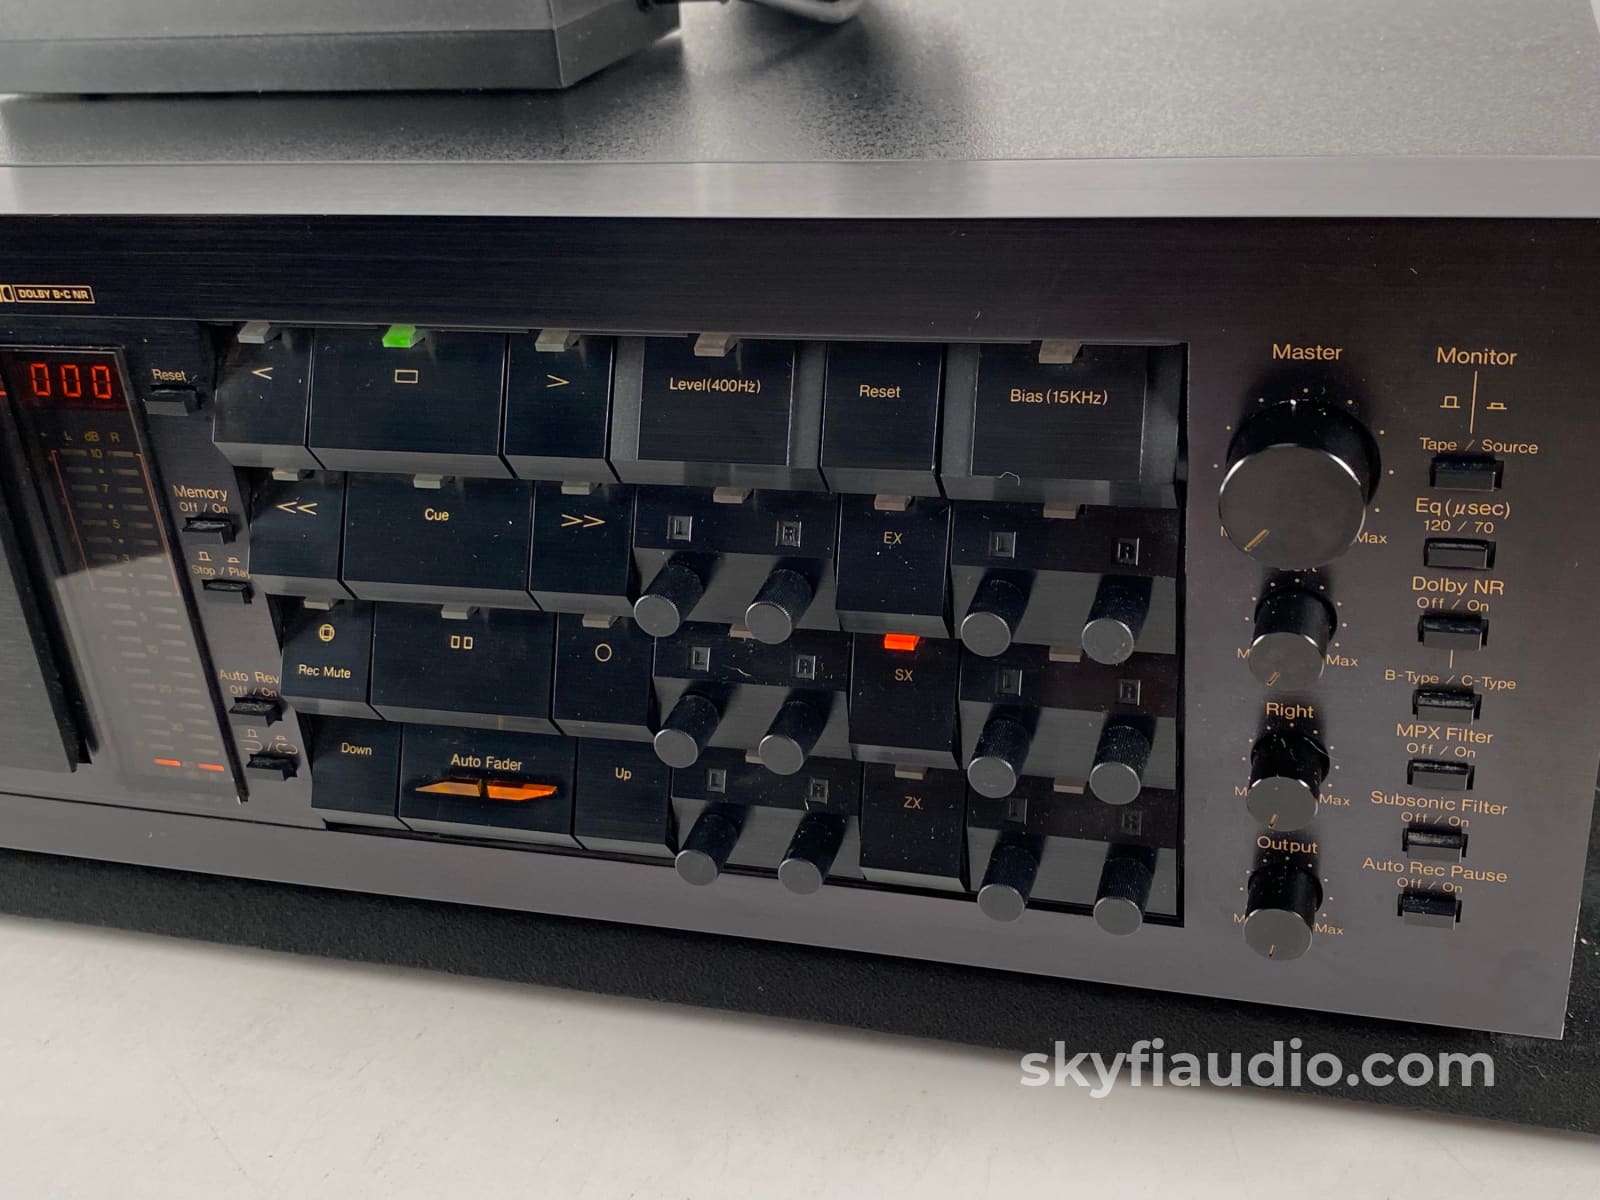 Nakamichi Dragon Tape Deck With Remote Restored And Amazing